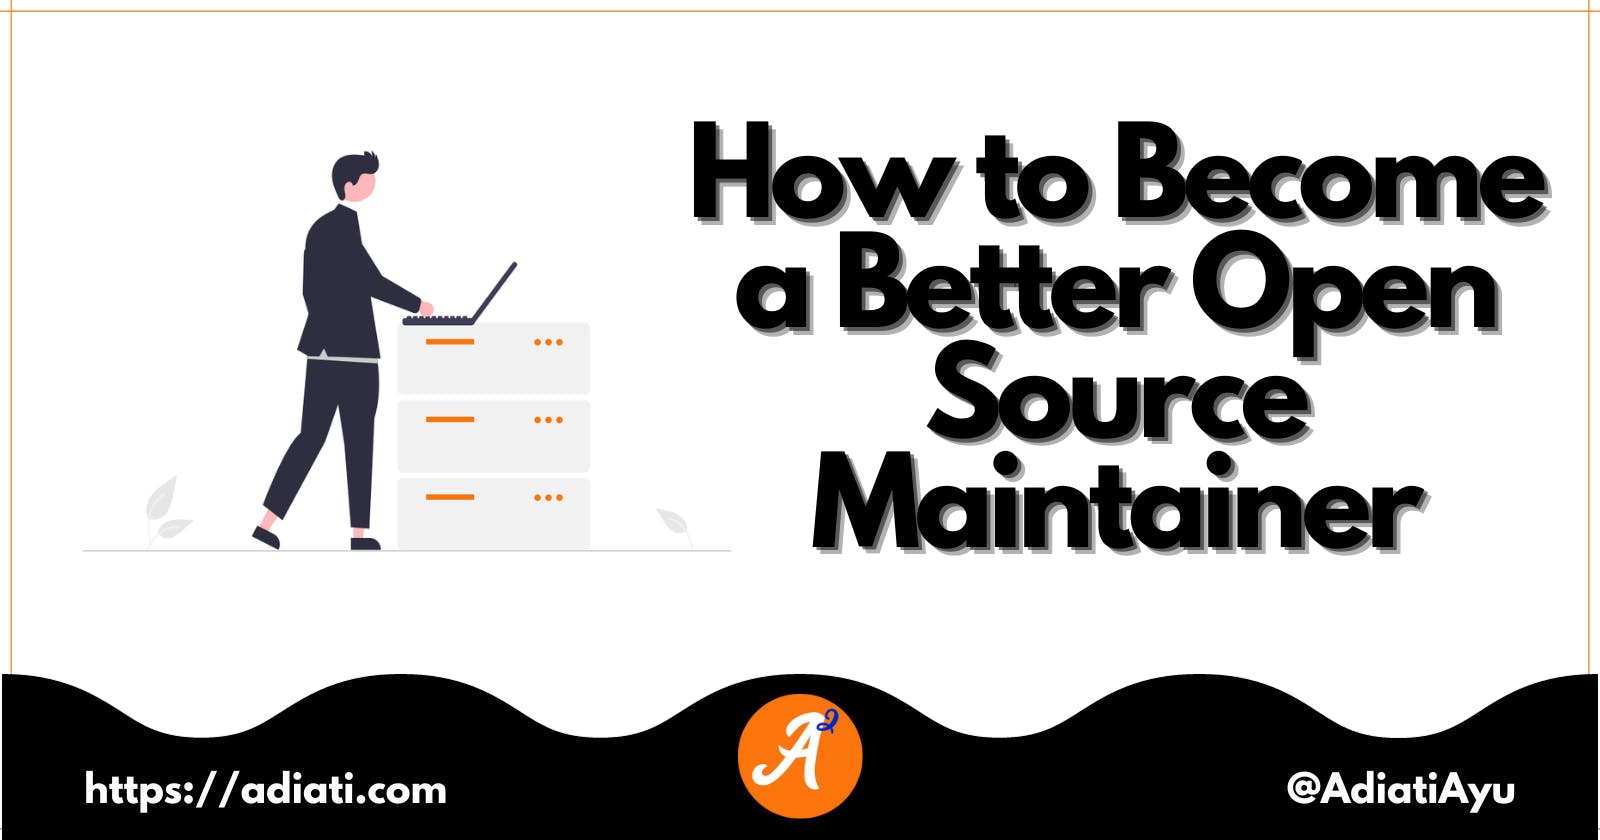 How to Become a Better Open Source Maintainer